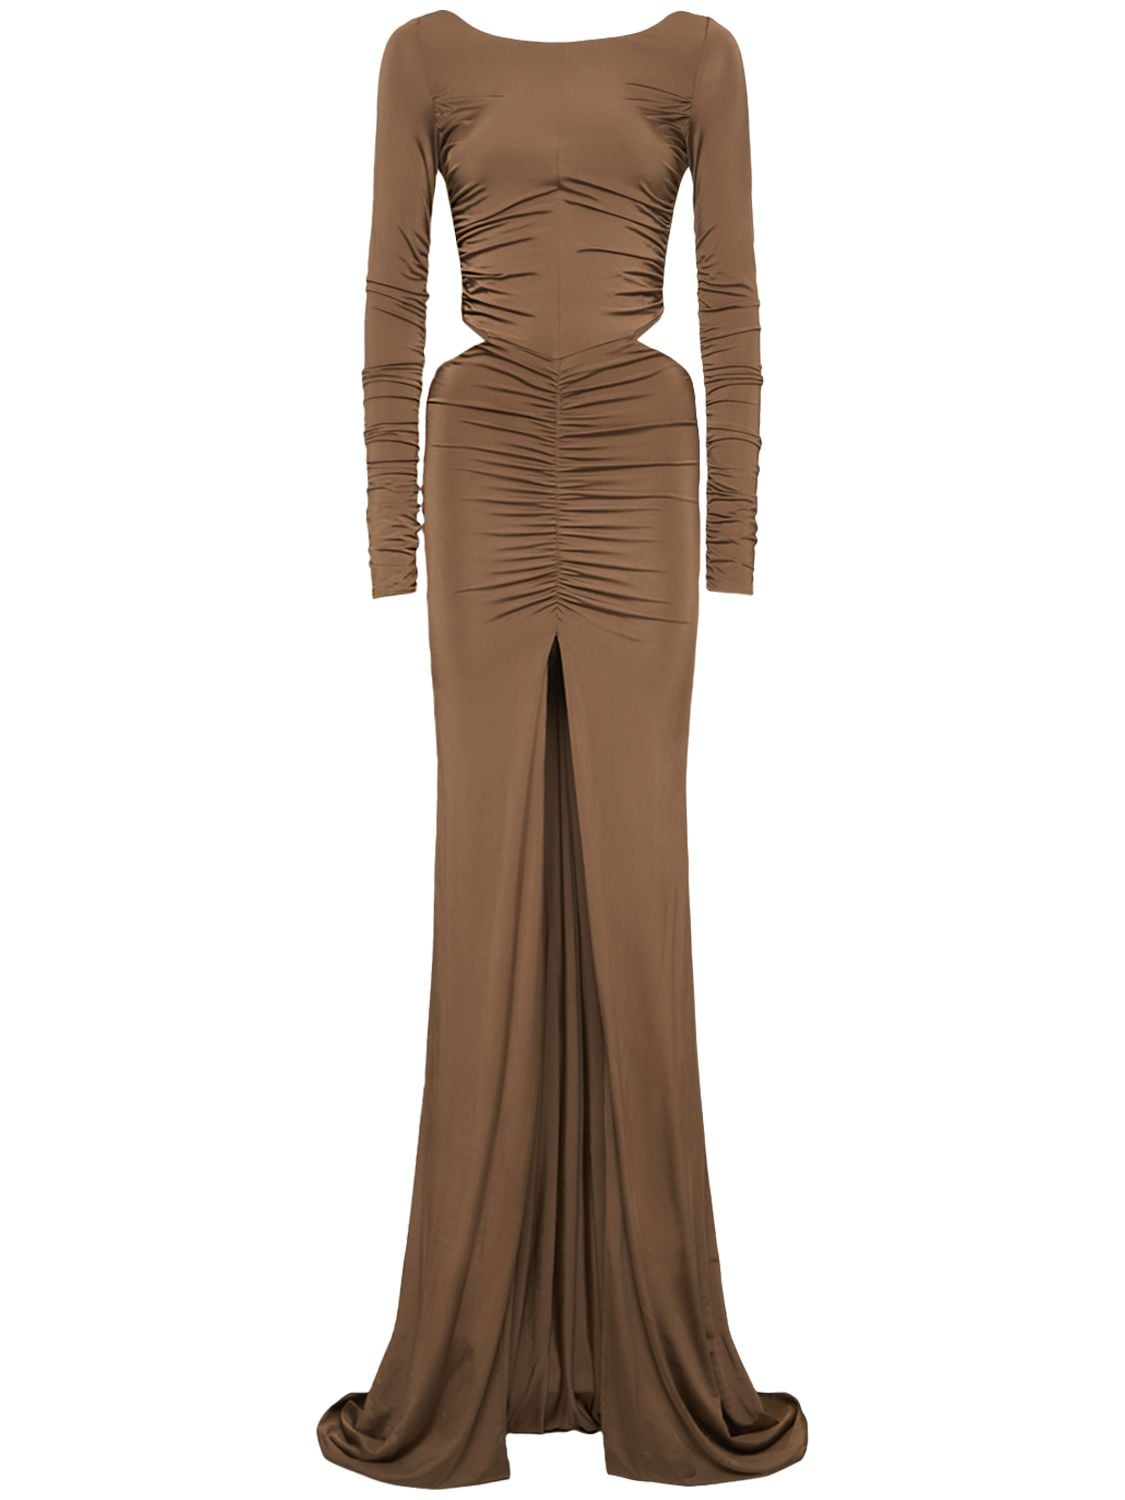 GIUSEPPE DI MORABITO RUCHED STRETCH JERSEY LONG DRESS